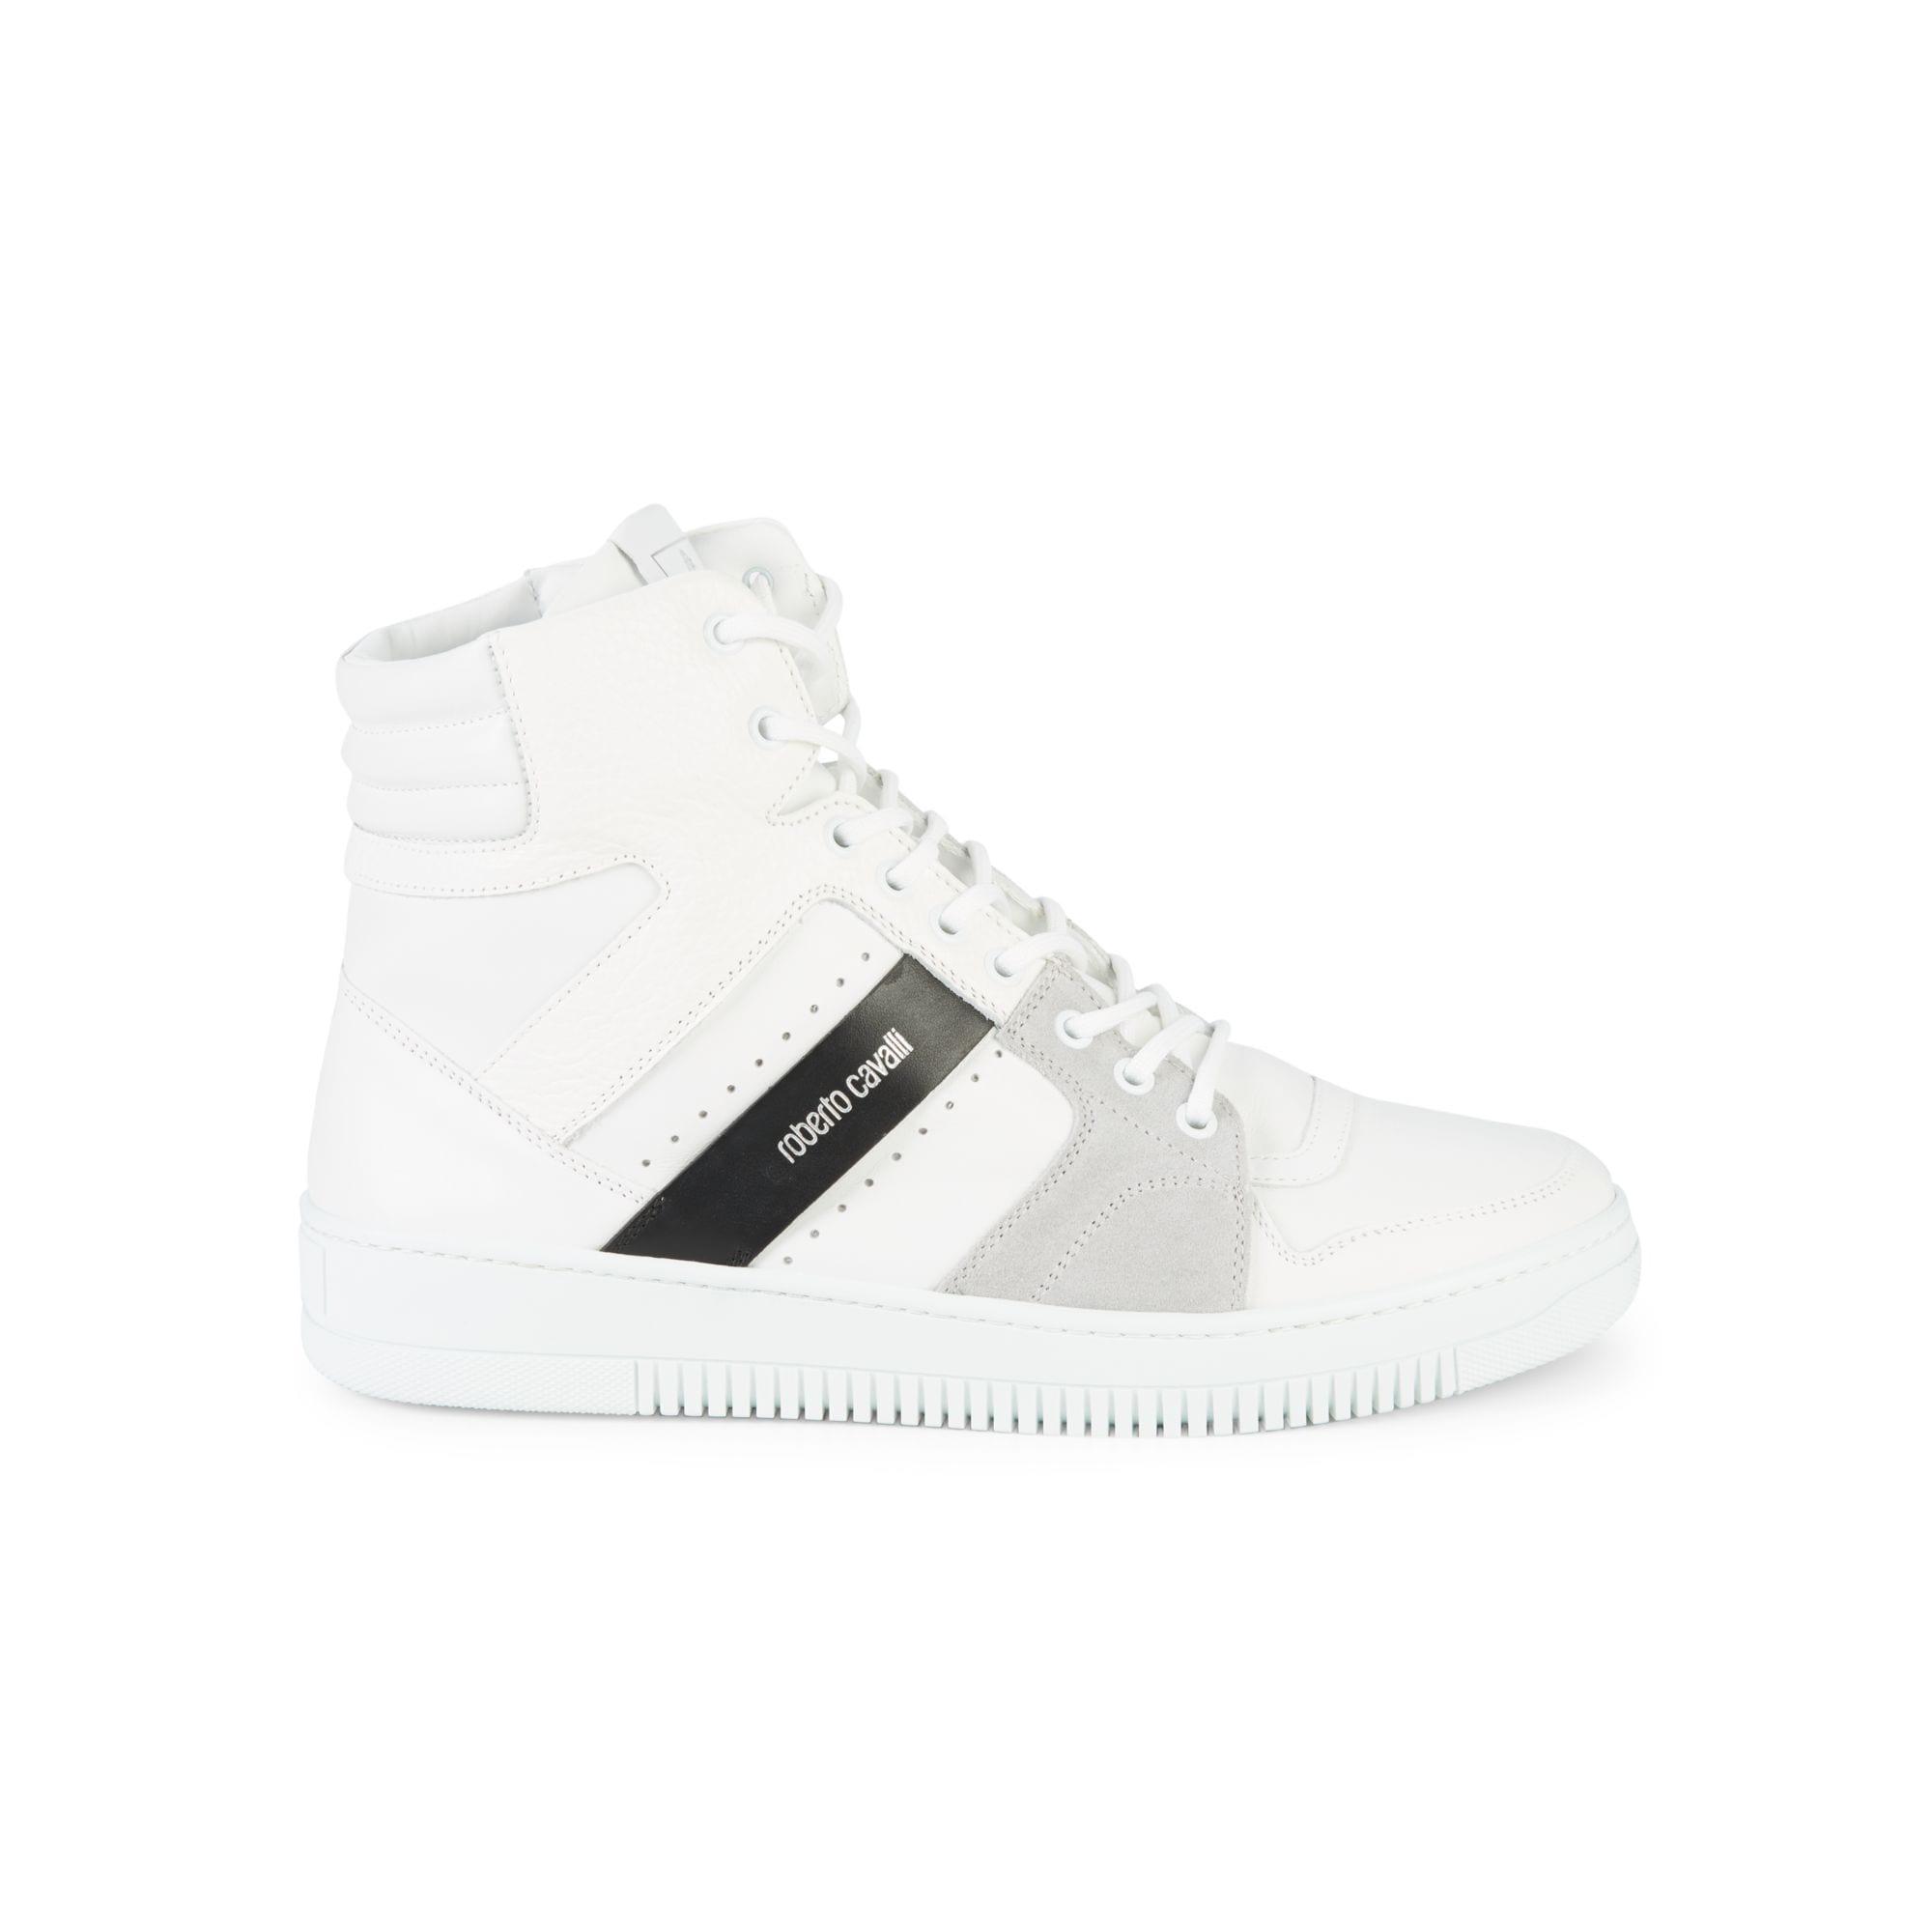 Roberto Cavalli High-top Leather & Suede Sneakers in White for Men - Lyst